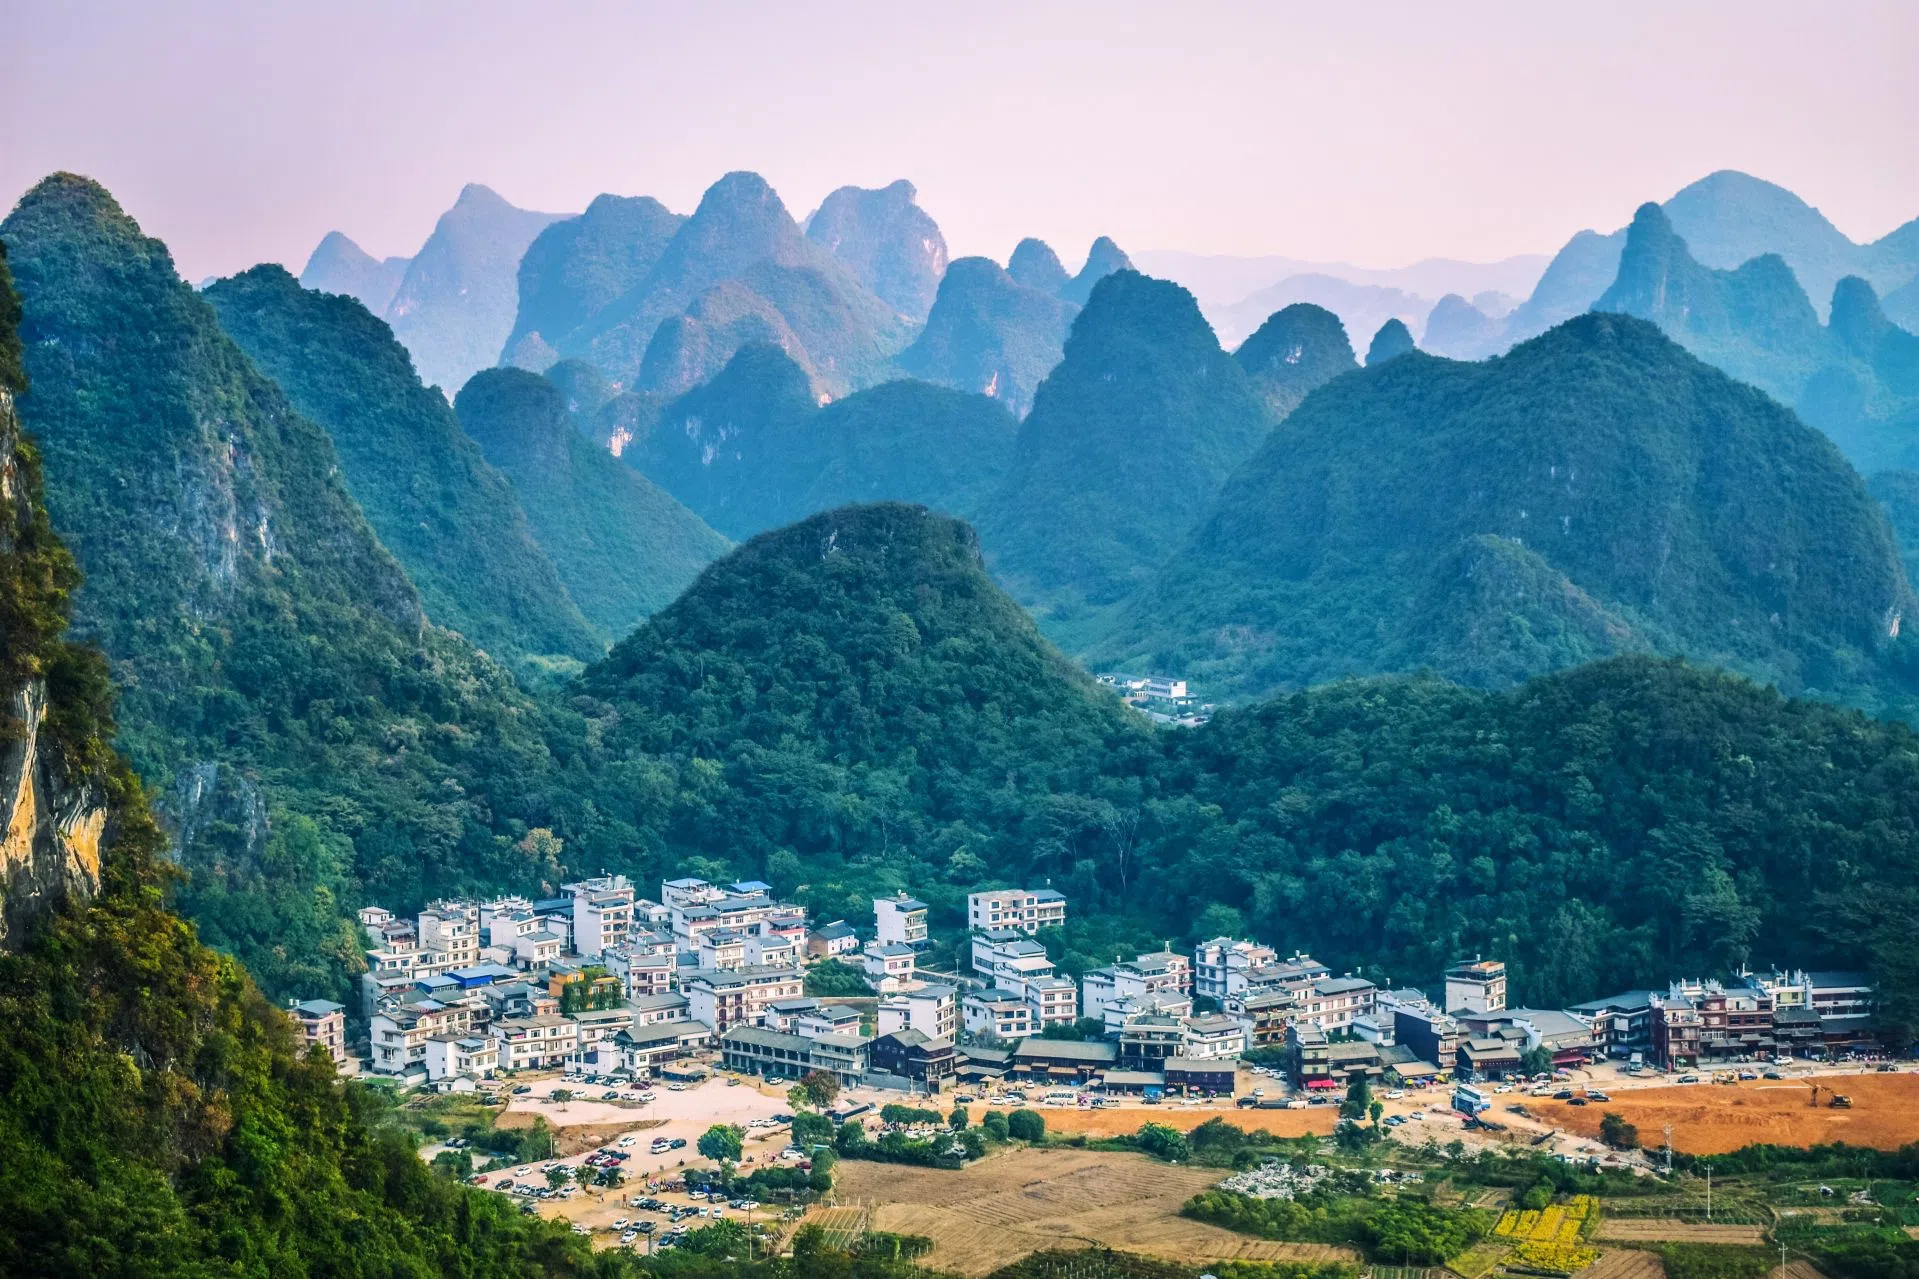 From under the arch of the Moon Hill, this photo was taken looking out at a town in the distance outside of Yangshuo, China. Behind the town are karst mountains, for which this region is well-known.